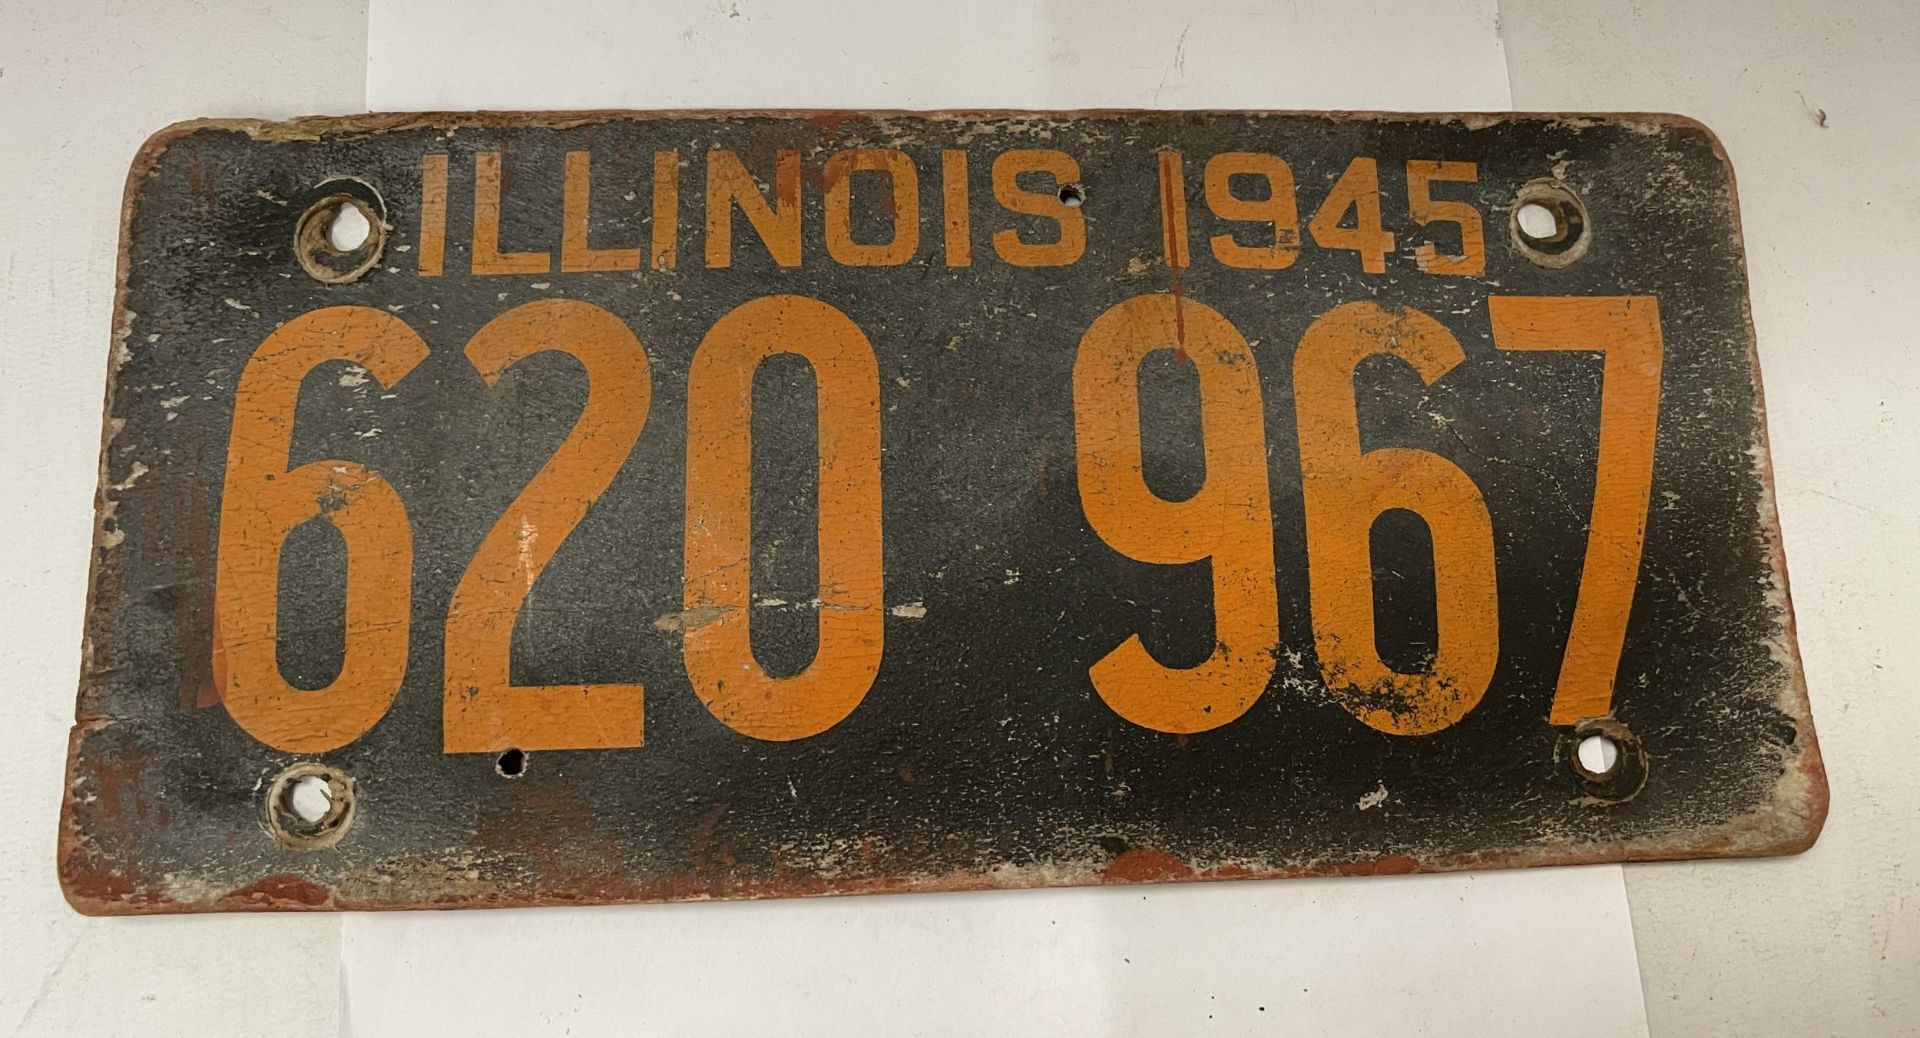 A VINTAGE LEATHER ILLONOIS NUMBER PLATE 620 967